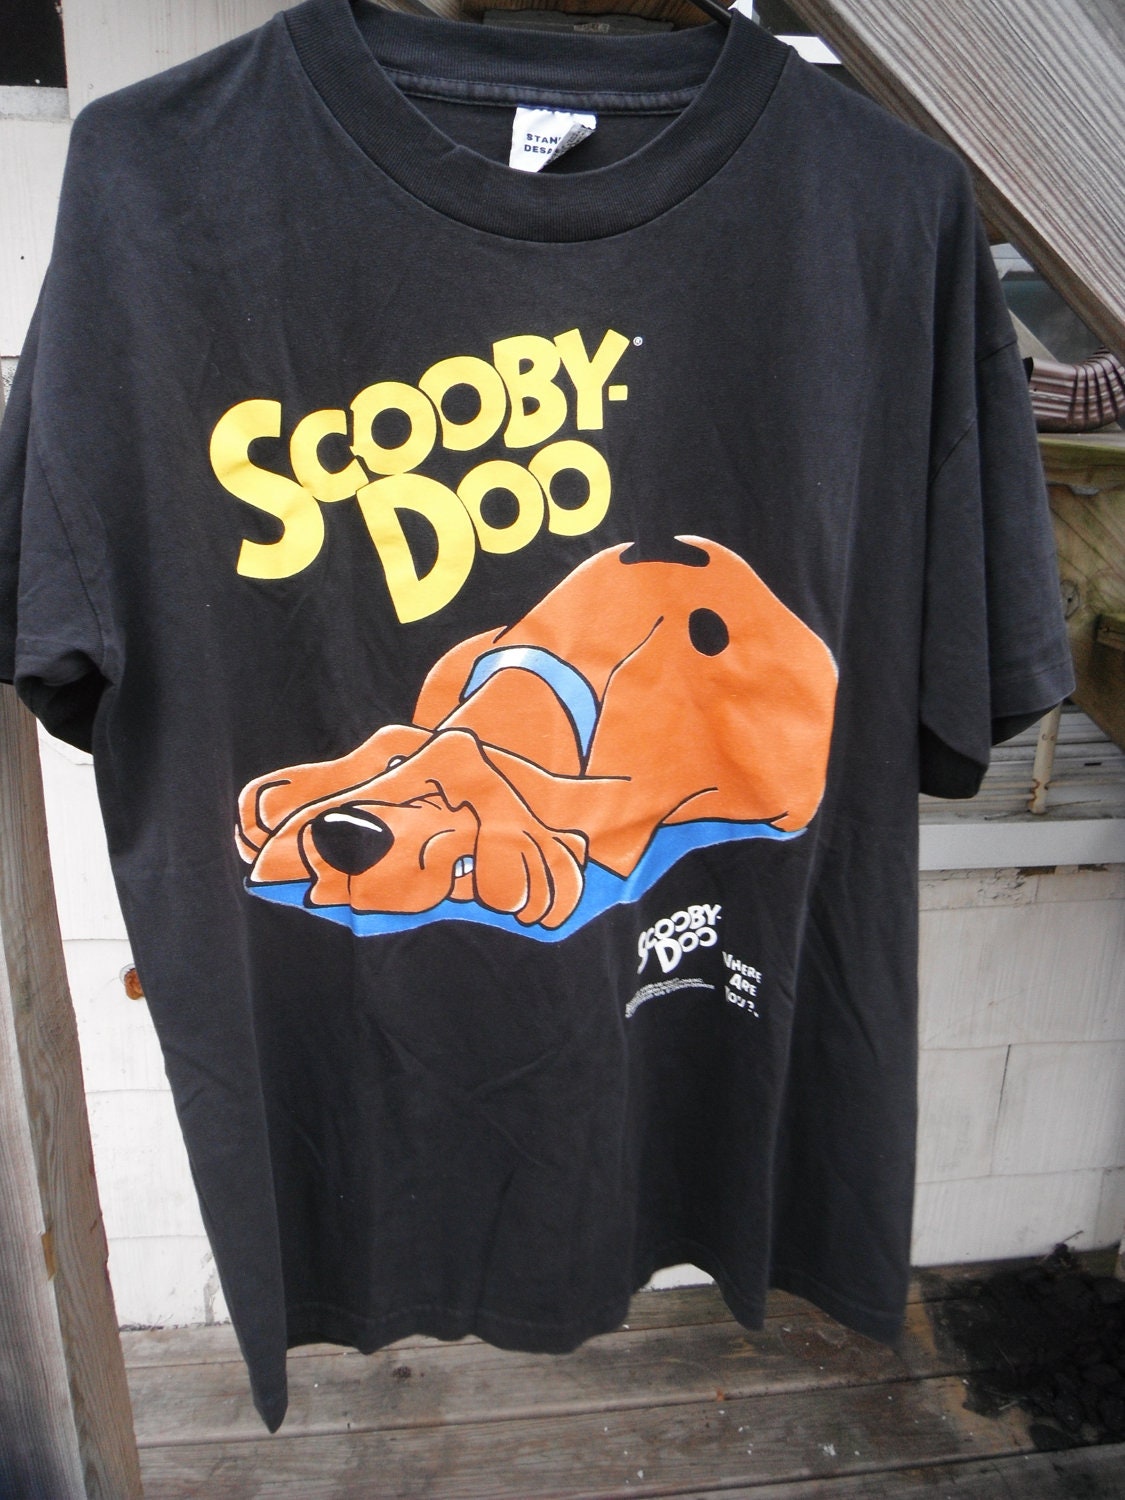 RESERVED /////// 90s Scooby Doo Cartoon T Shirt by SothebysBabe